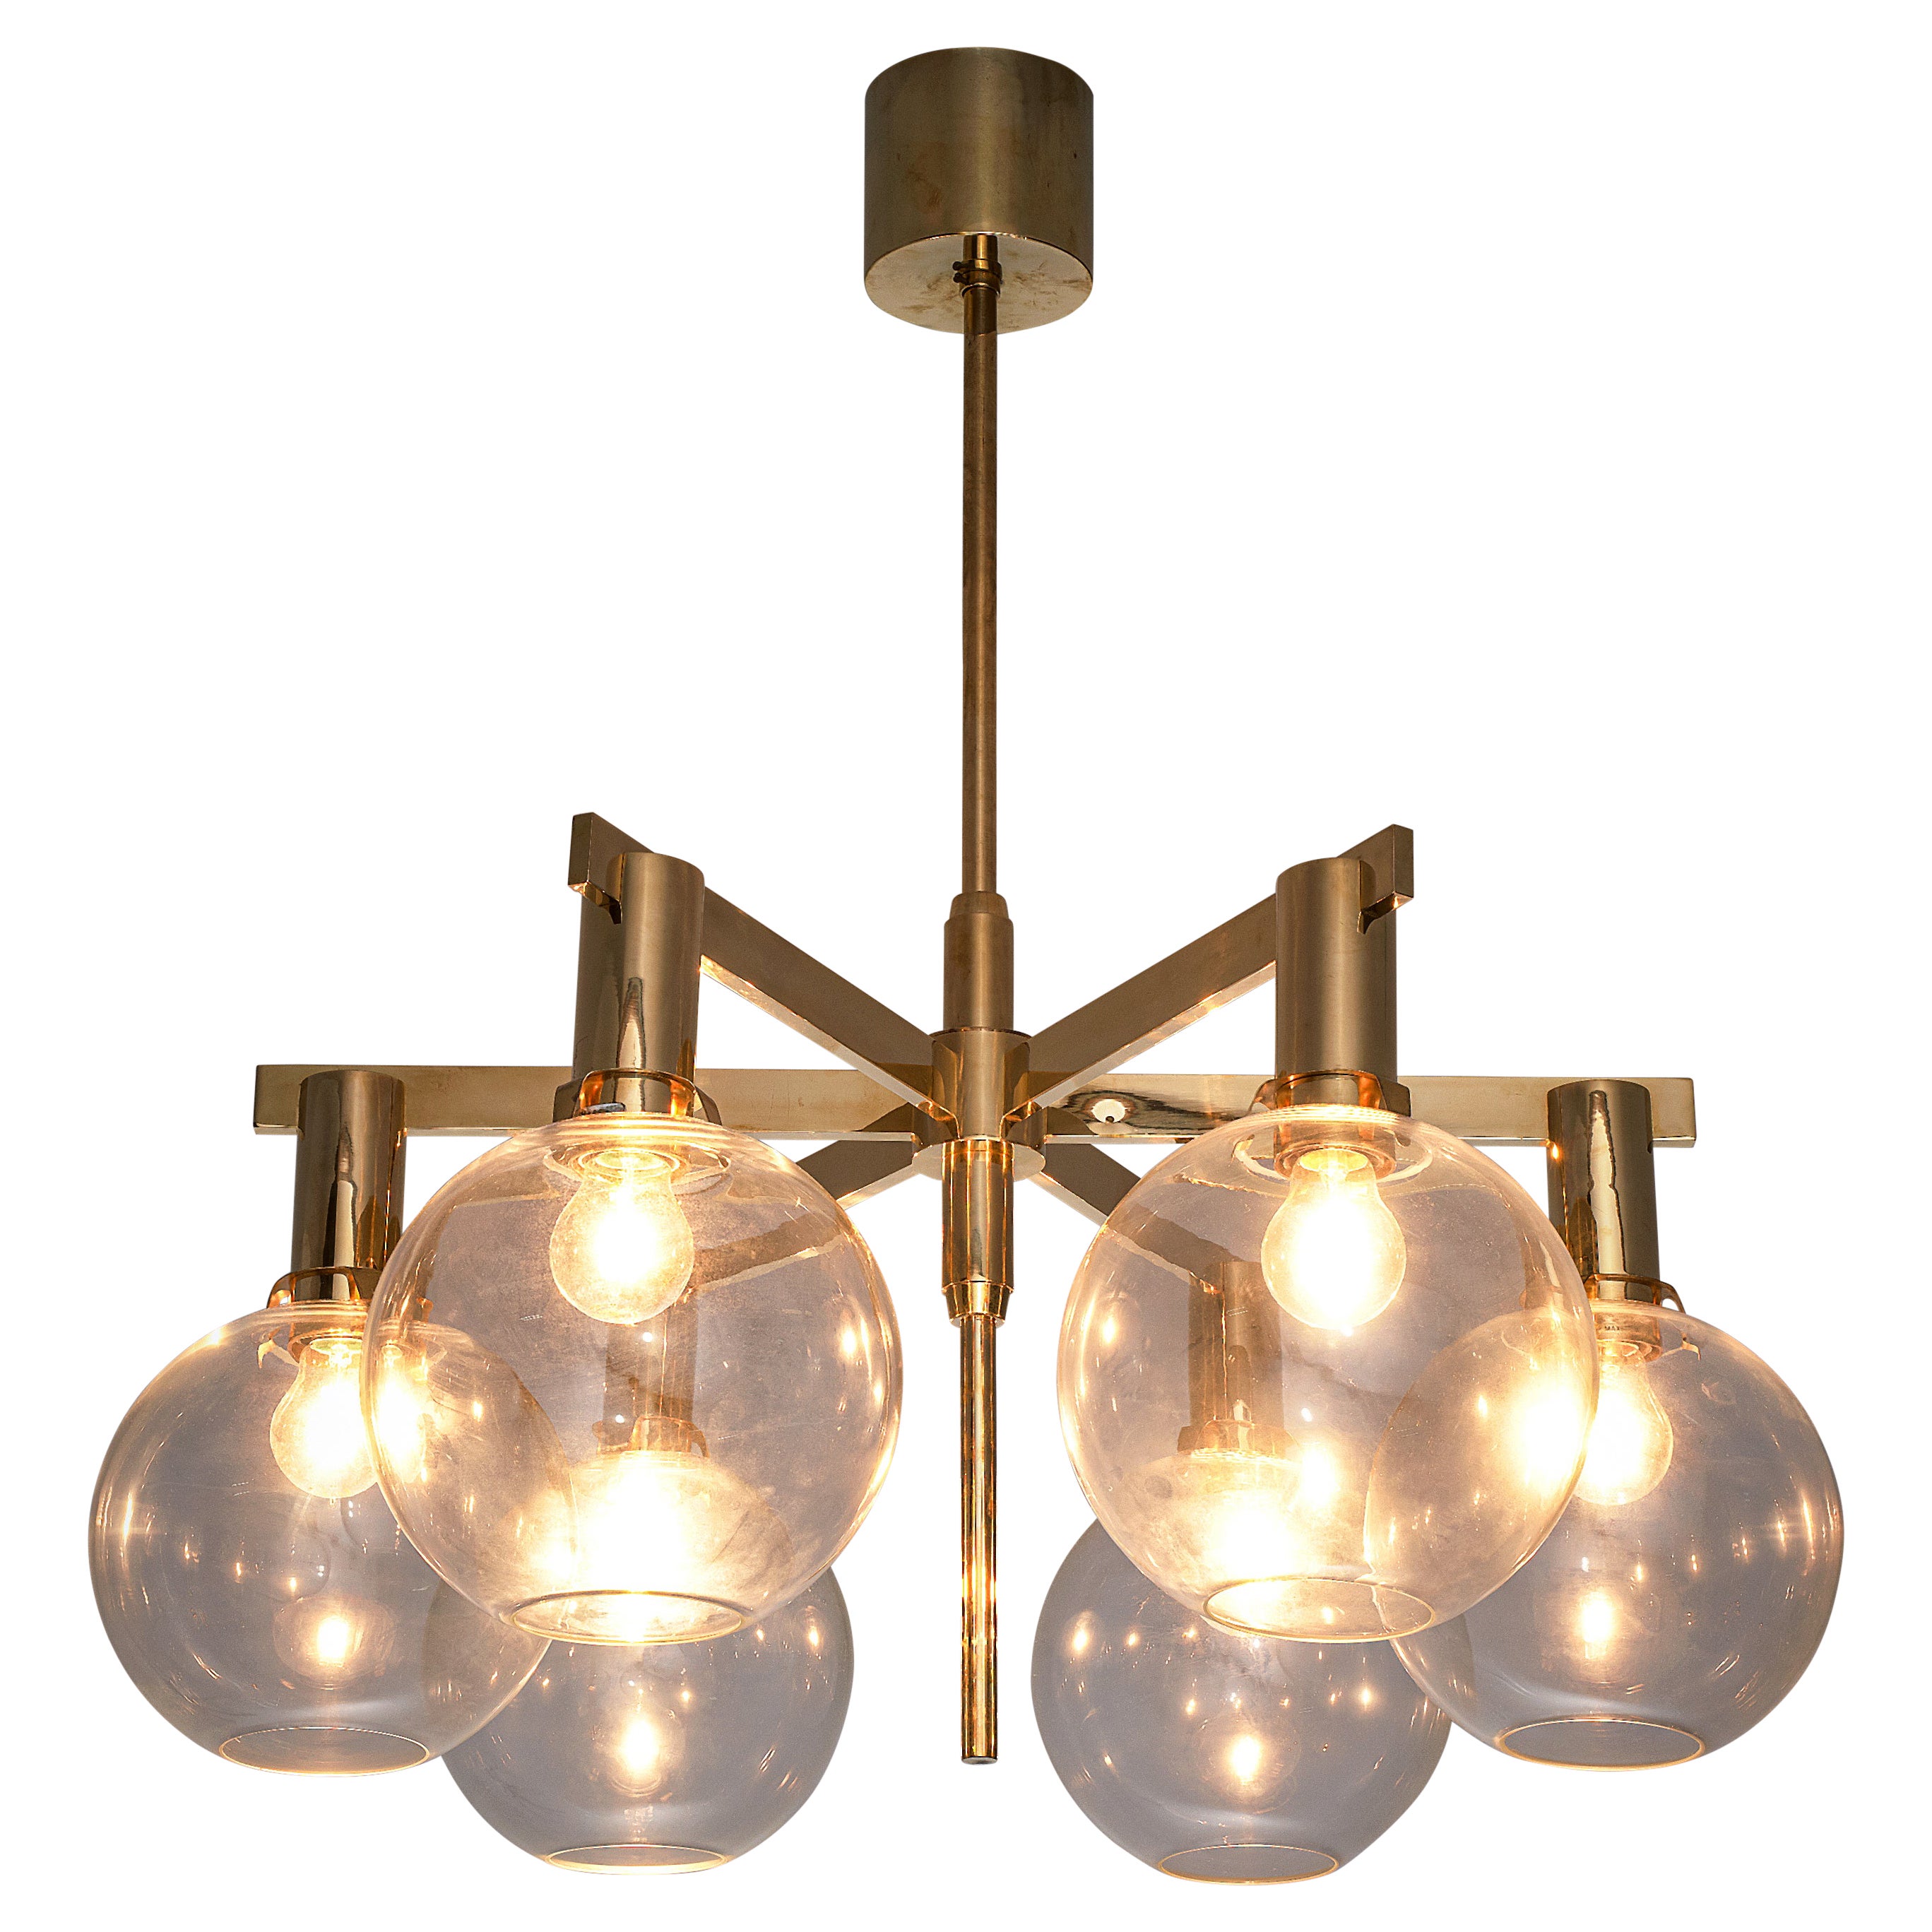 Hans-Agne Jakobsson 'Pastoral' Chandelier in Glass and Brass For Sale